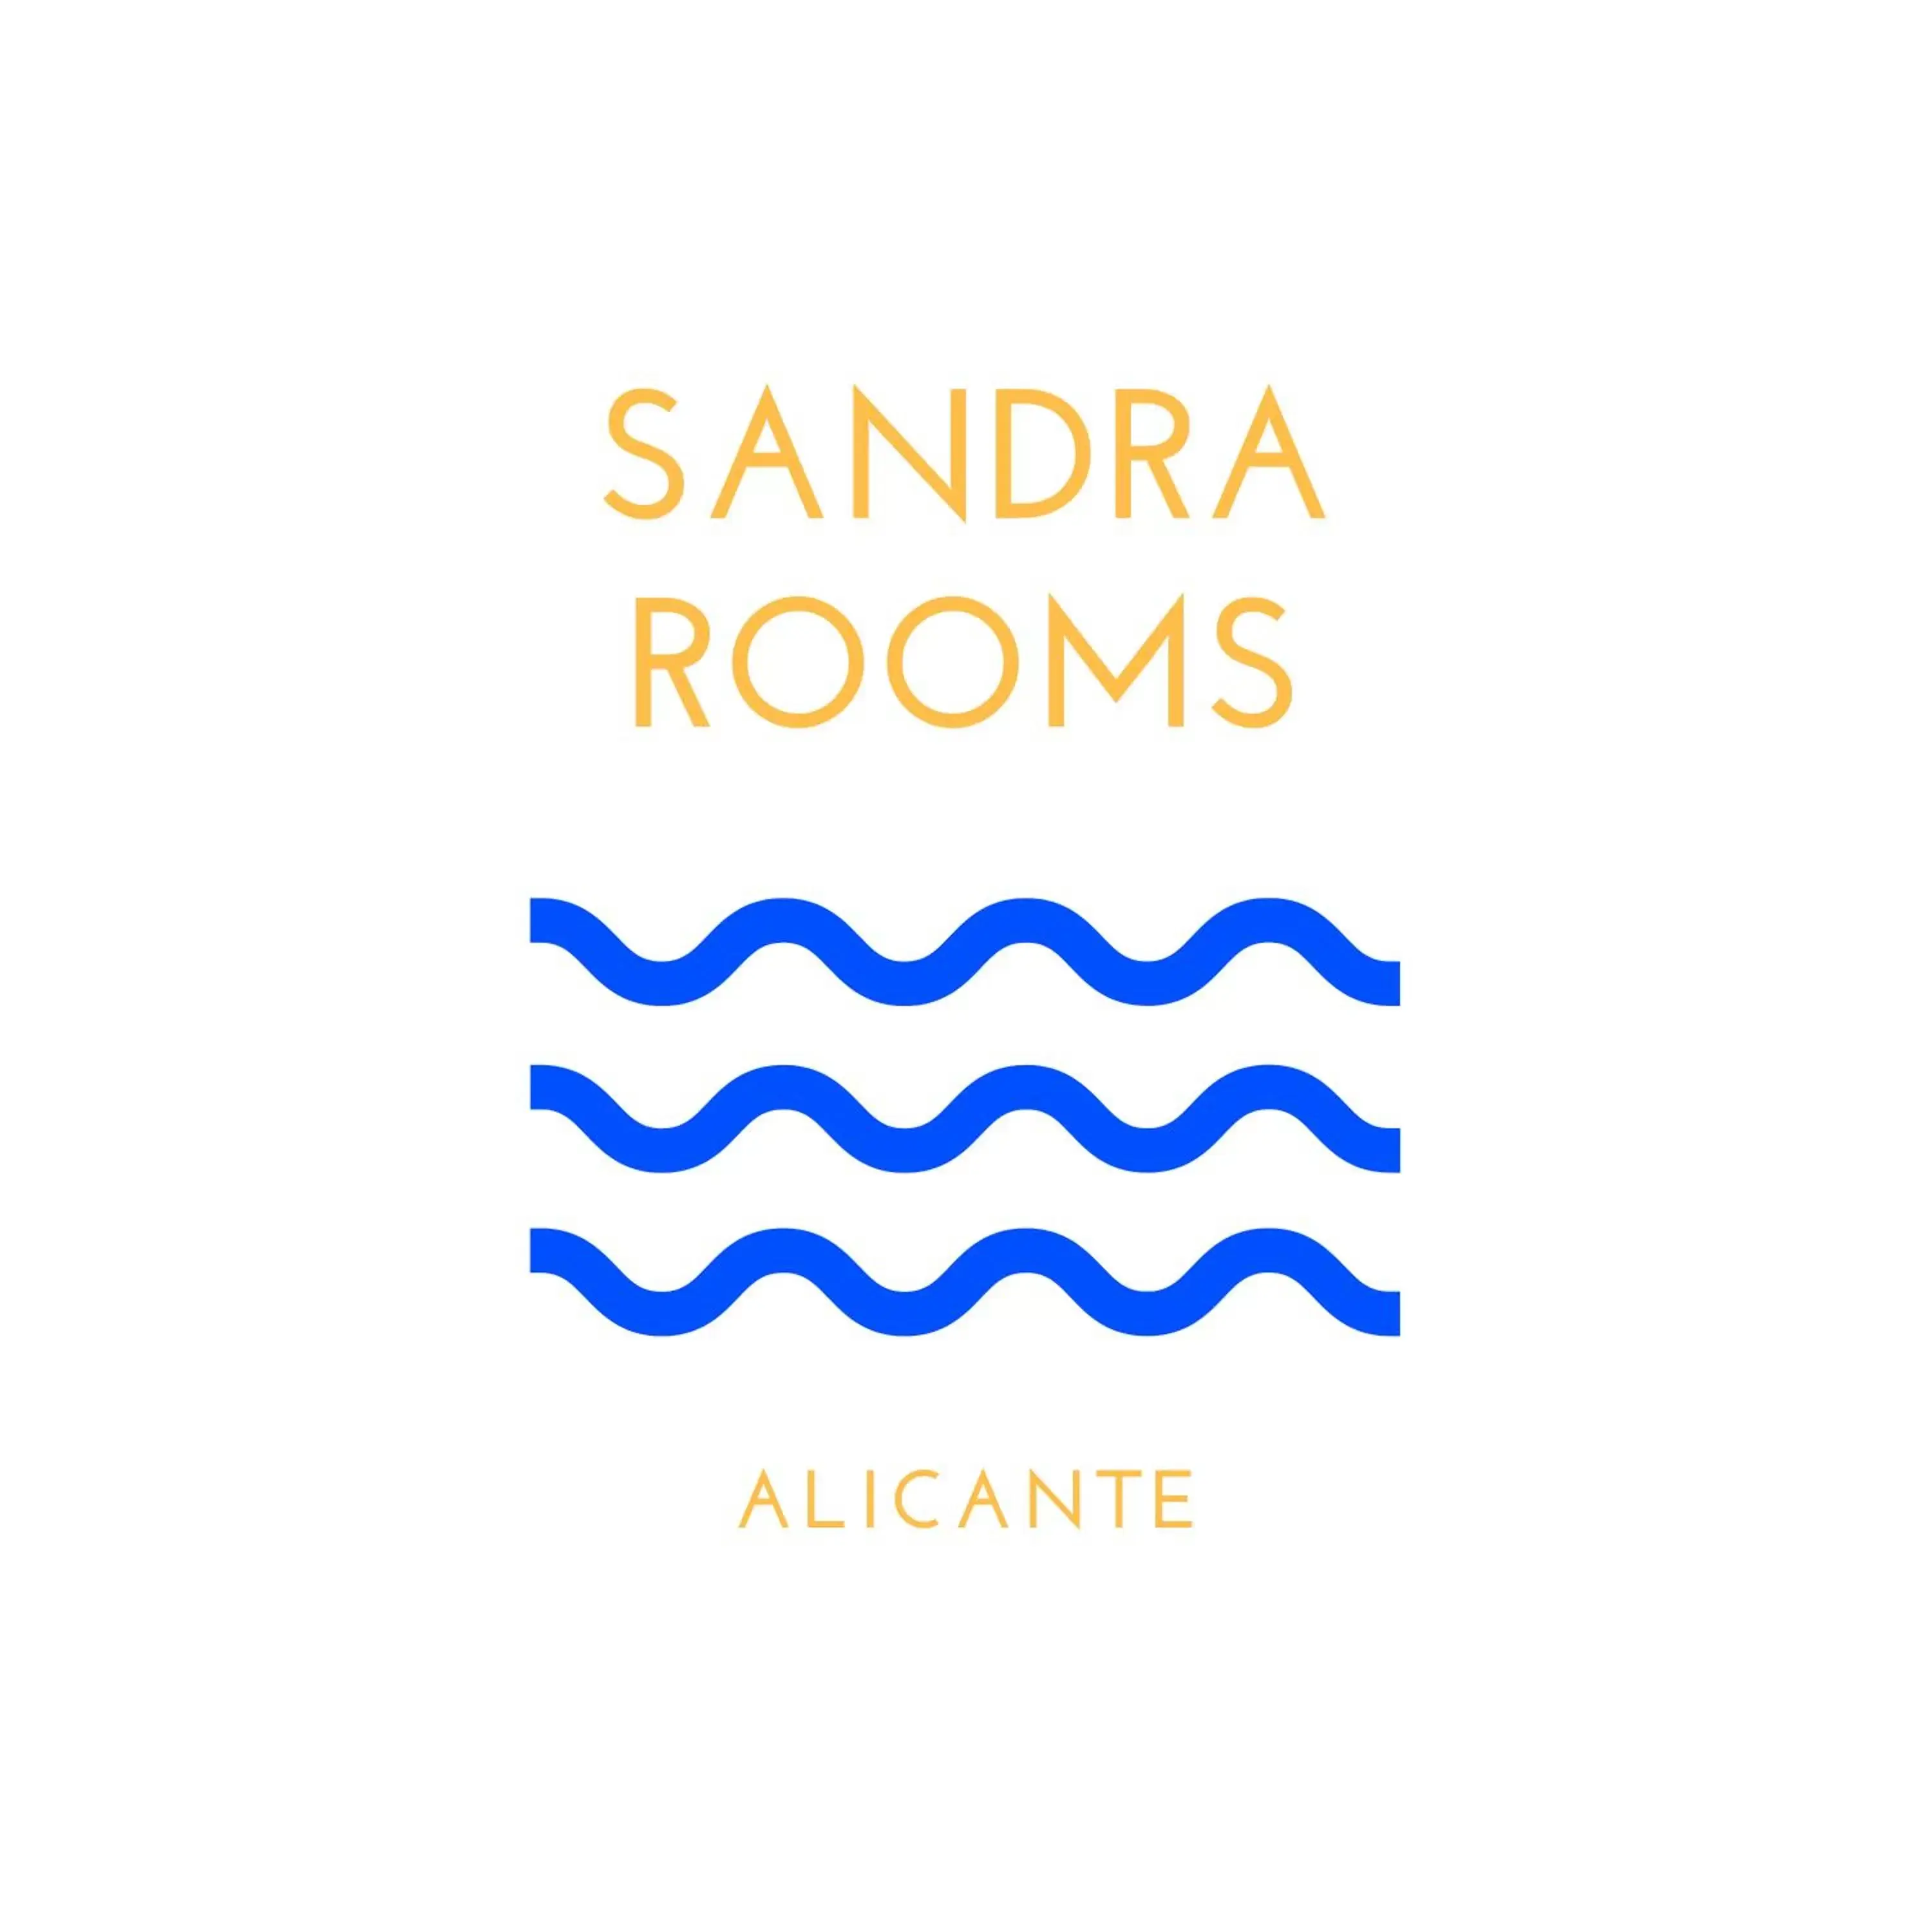 Property logo or sign in Sandra Rooms